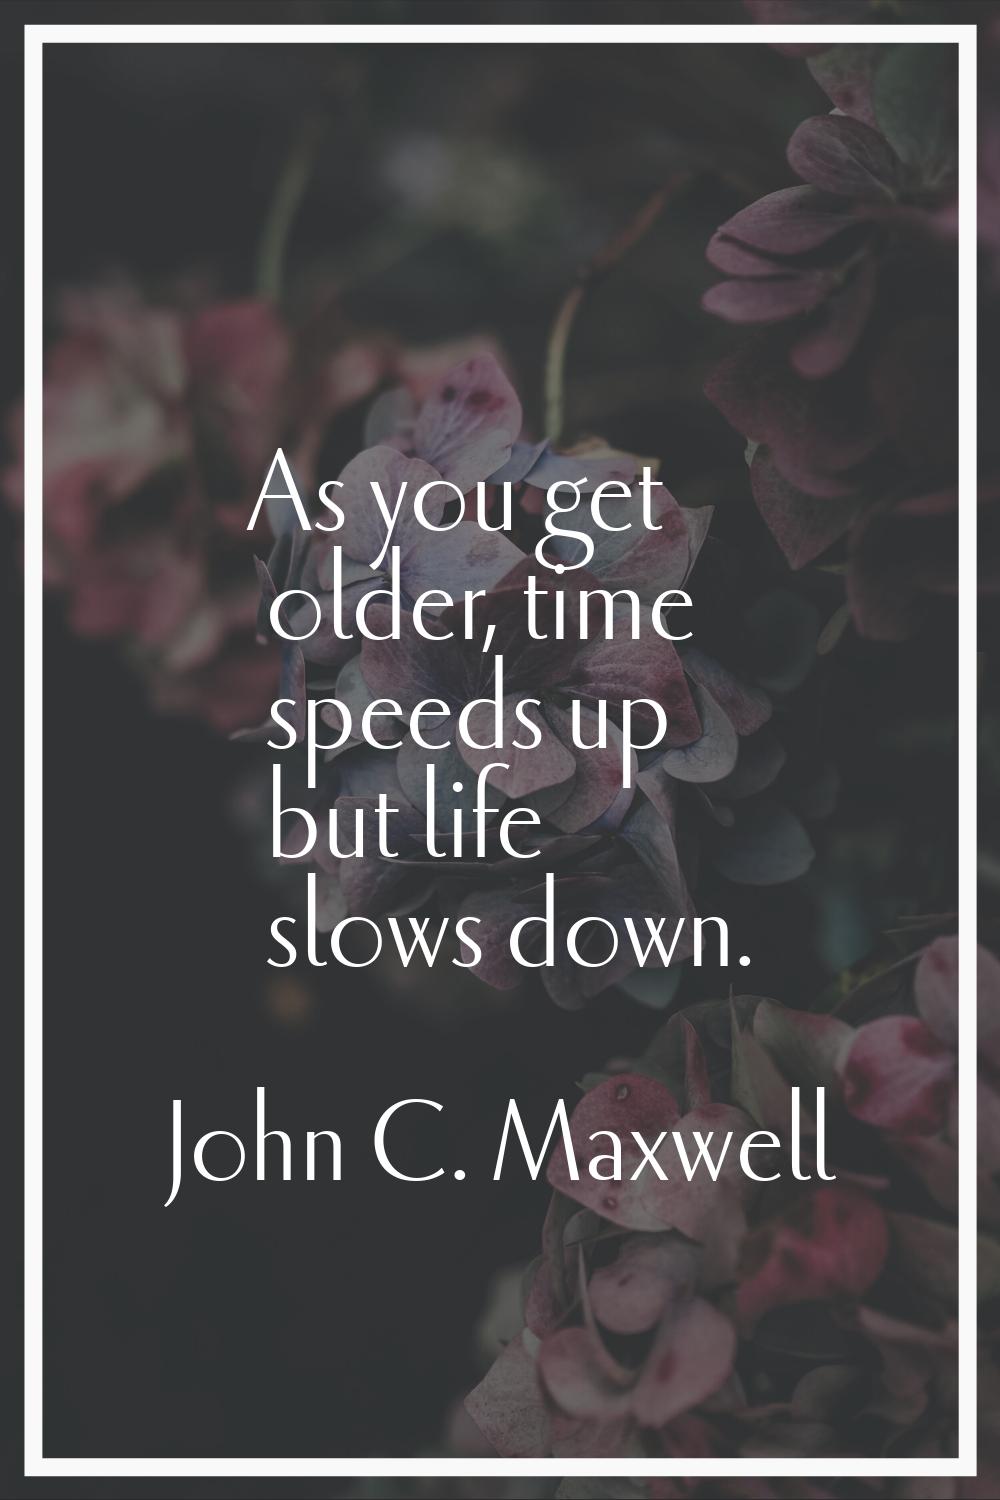 As you get older, time speeds up but life slows down.